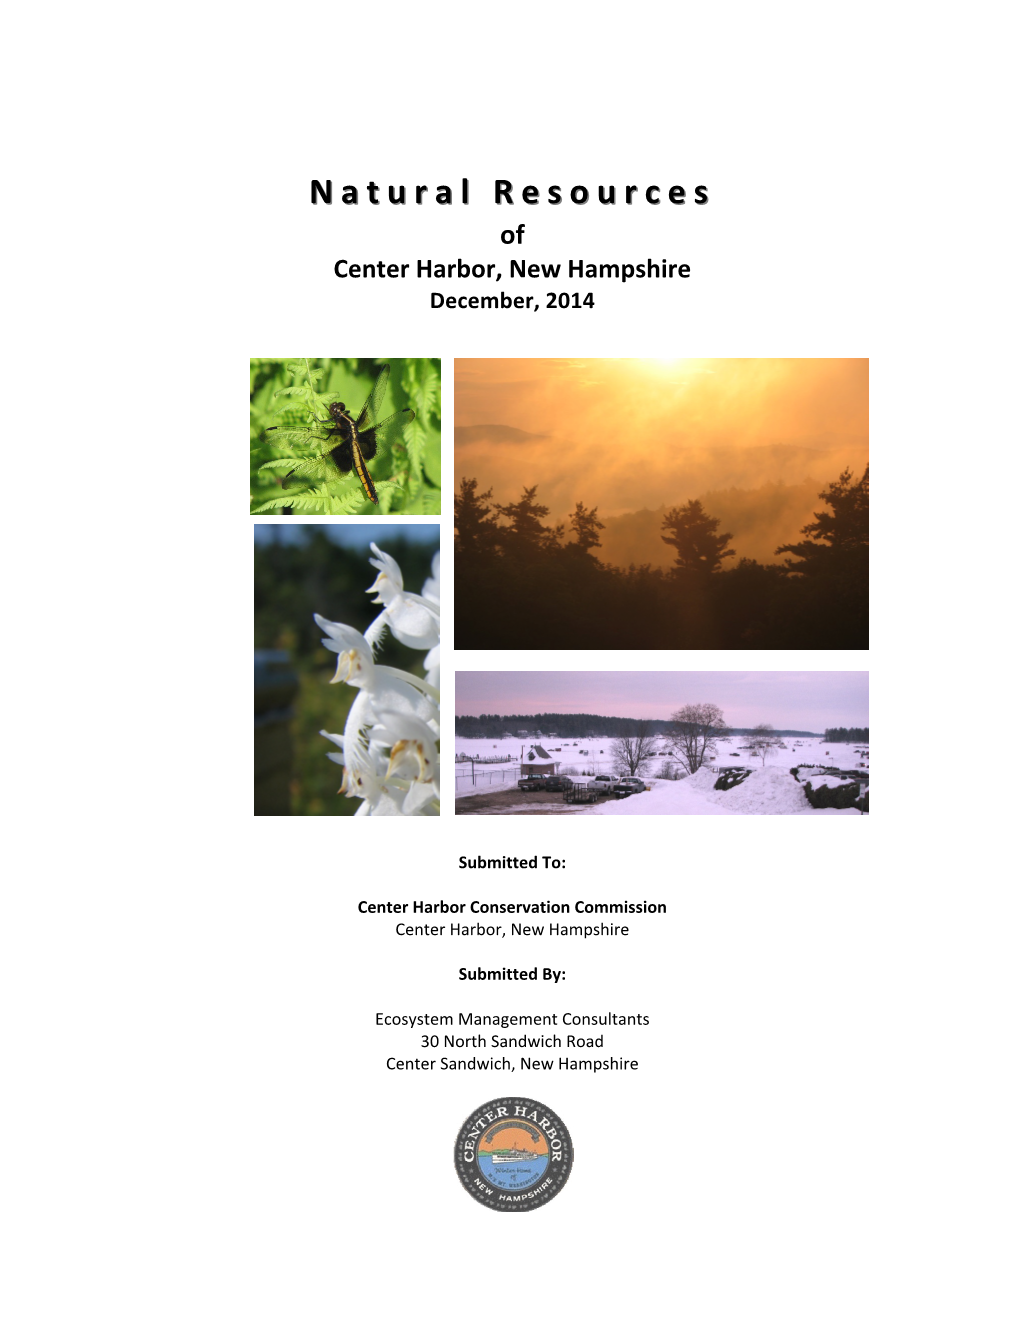 Natural Resources of Center Harbor, New Hampshire December, 2014